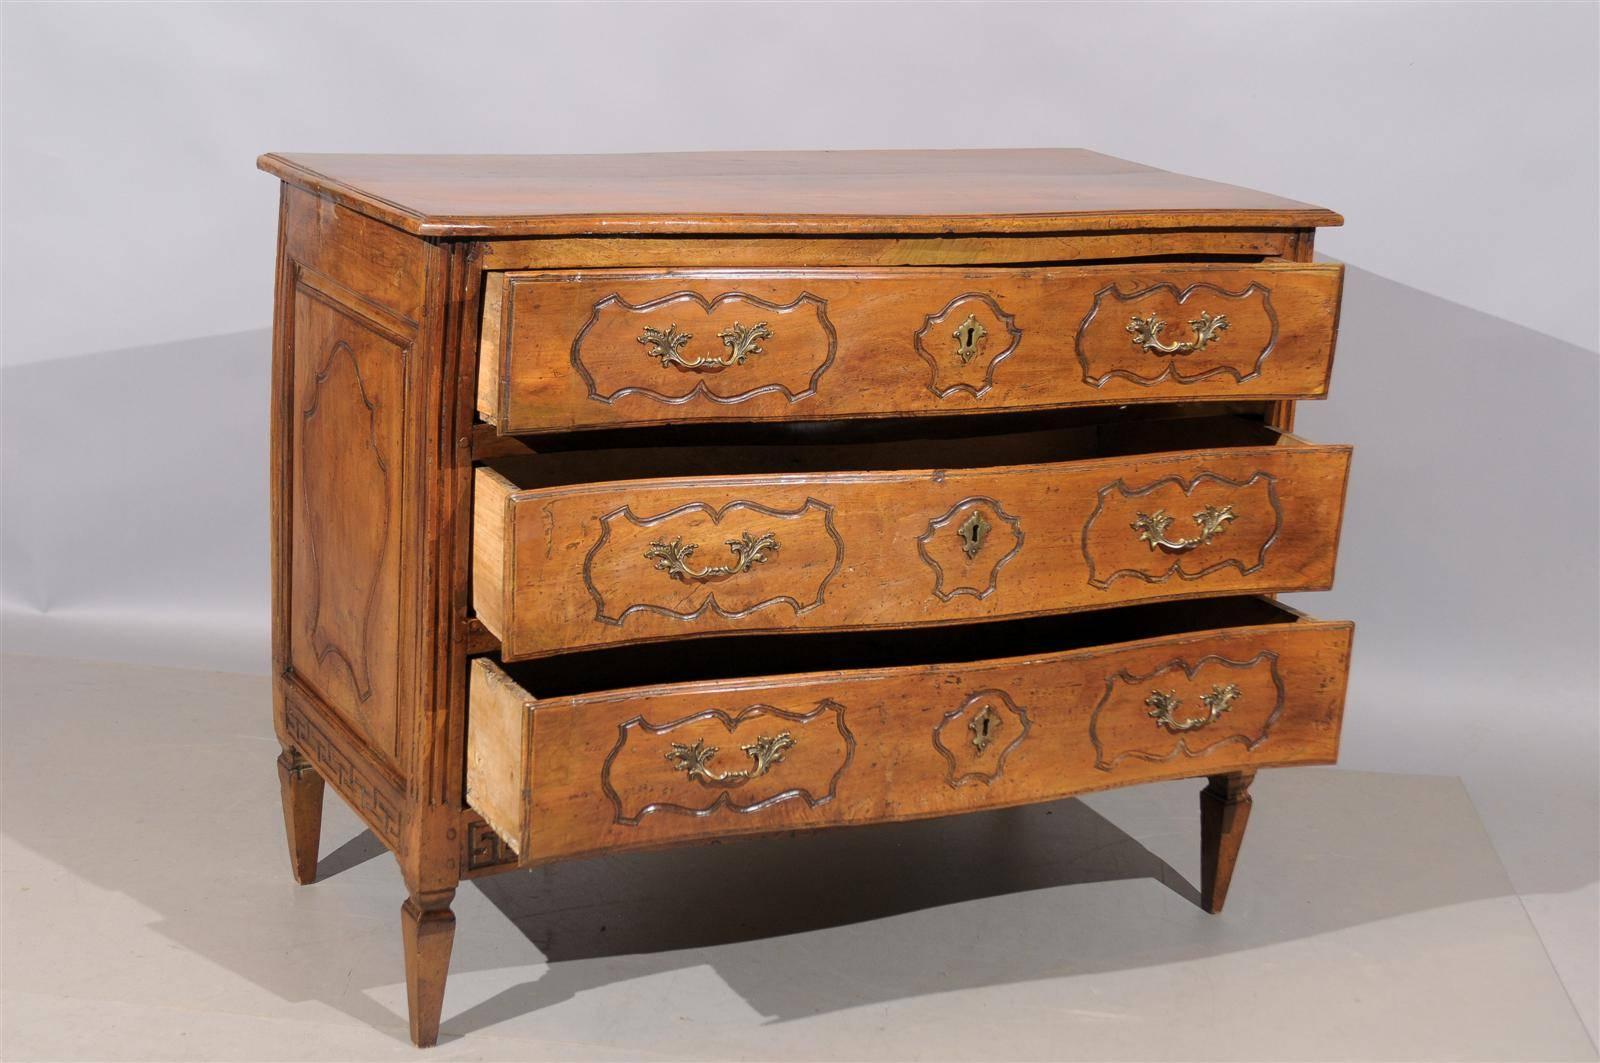 Italian Transitional Walnut Commode with Greek Key Carving, Late 18th Century 6